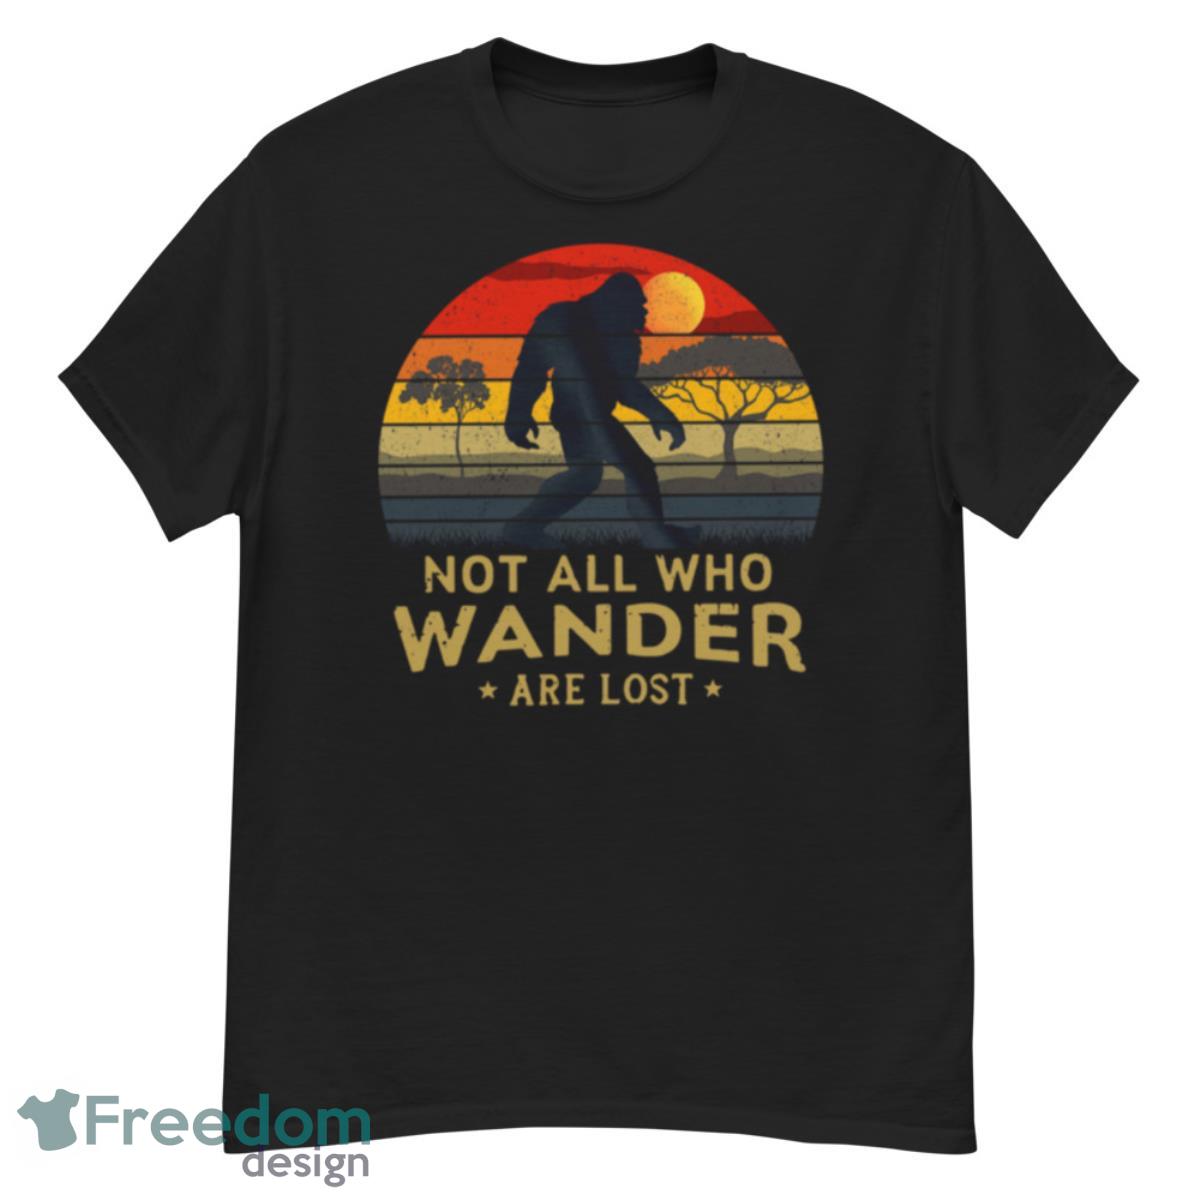 Bigfoot Not All Who Wander Are Lost Vintage Retro Shirt - G500 Men’s Classic T-Shirt